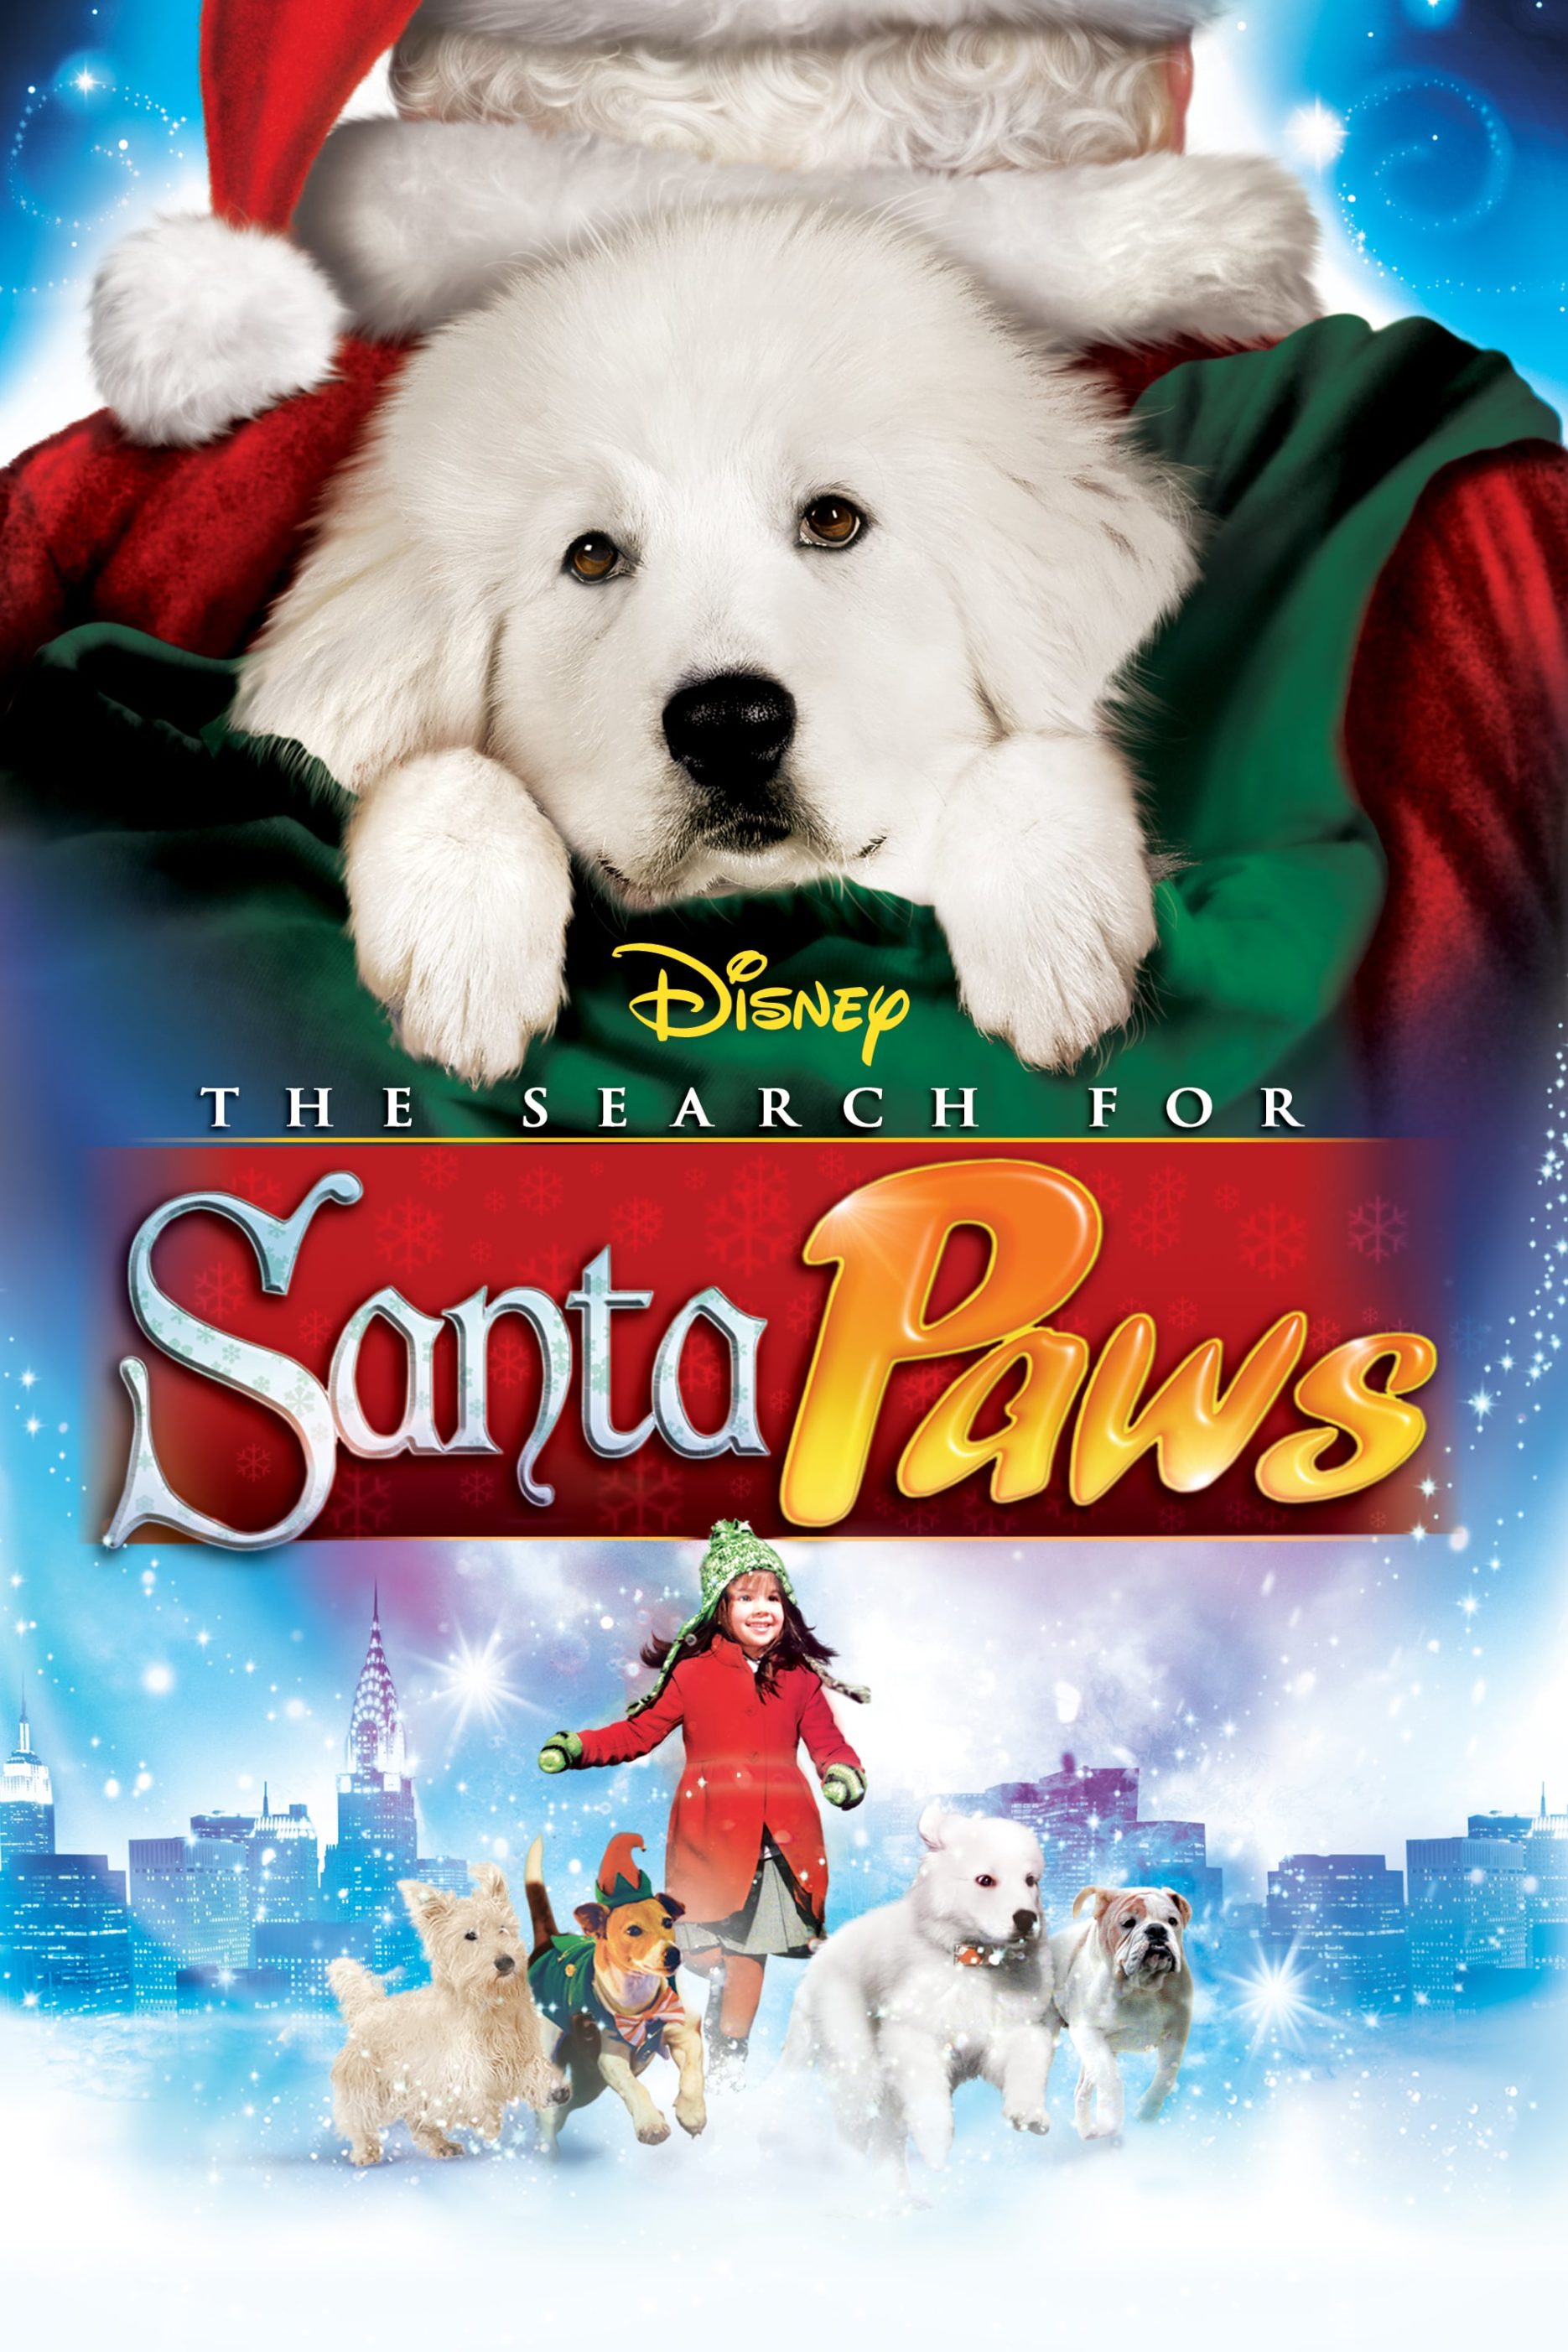 Poster for the movie "The Search for Santa Paws"